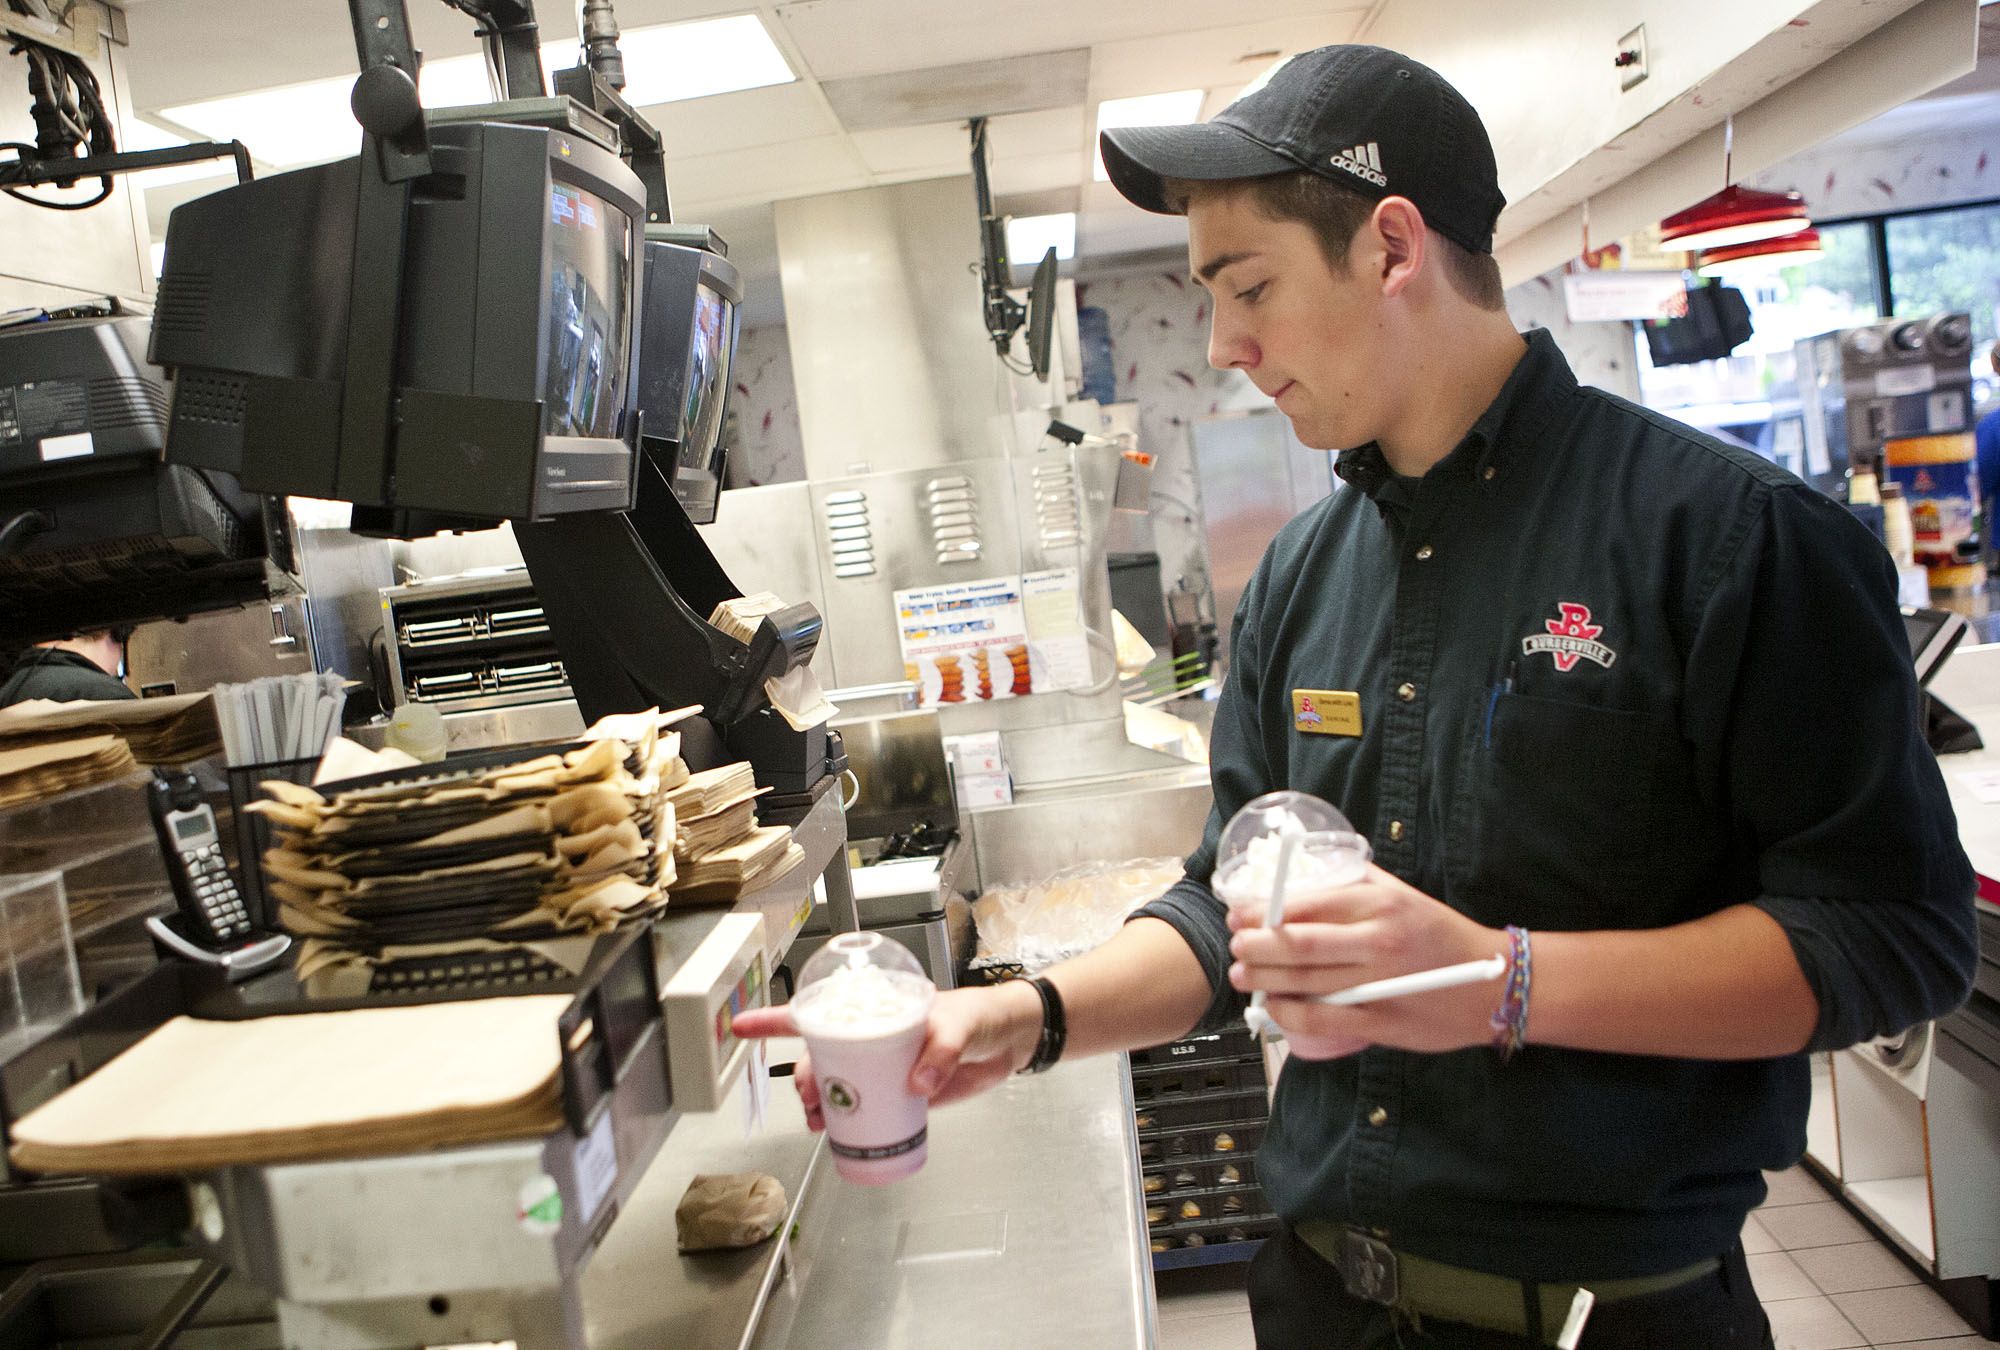 Lucas Schwartz, 17, clears an order before delivering shakes to customers as he works his shift at Burgerville on 2200 E. 4th Plain Mills Boulevard in Vancouver.